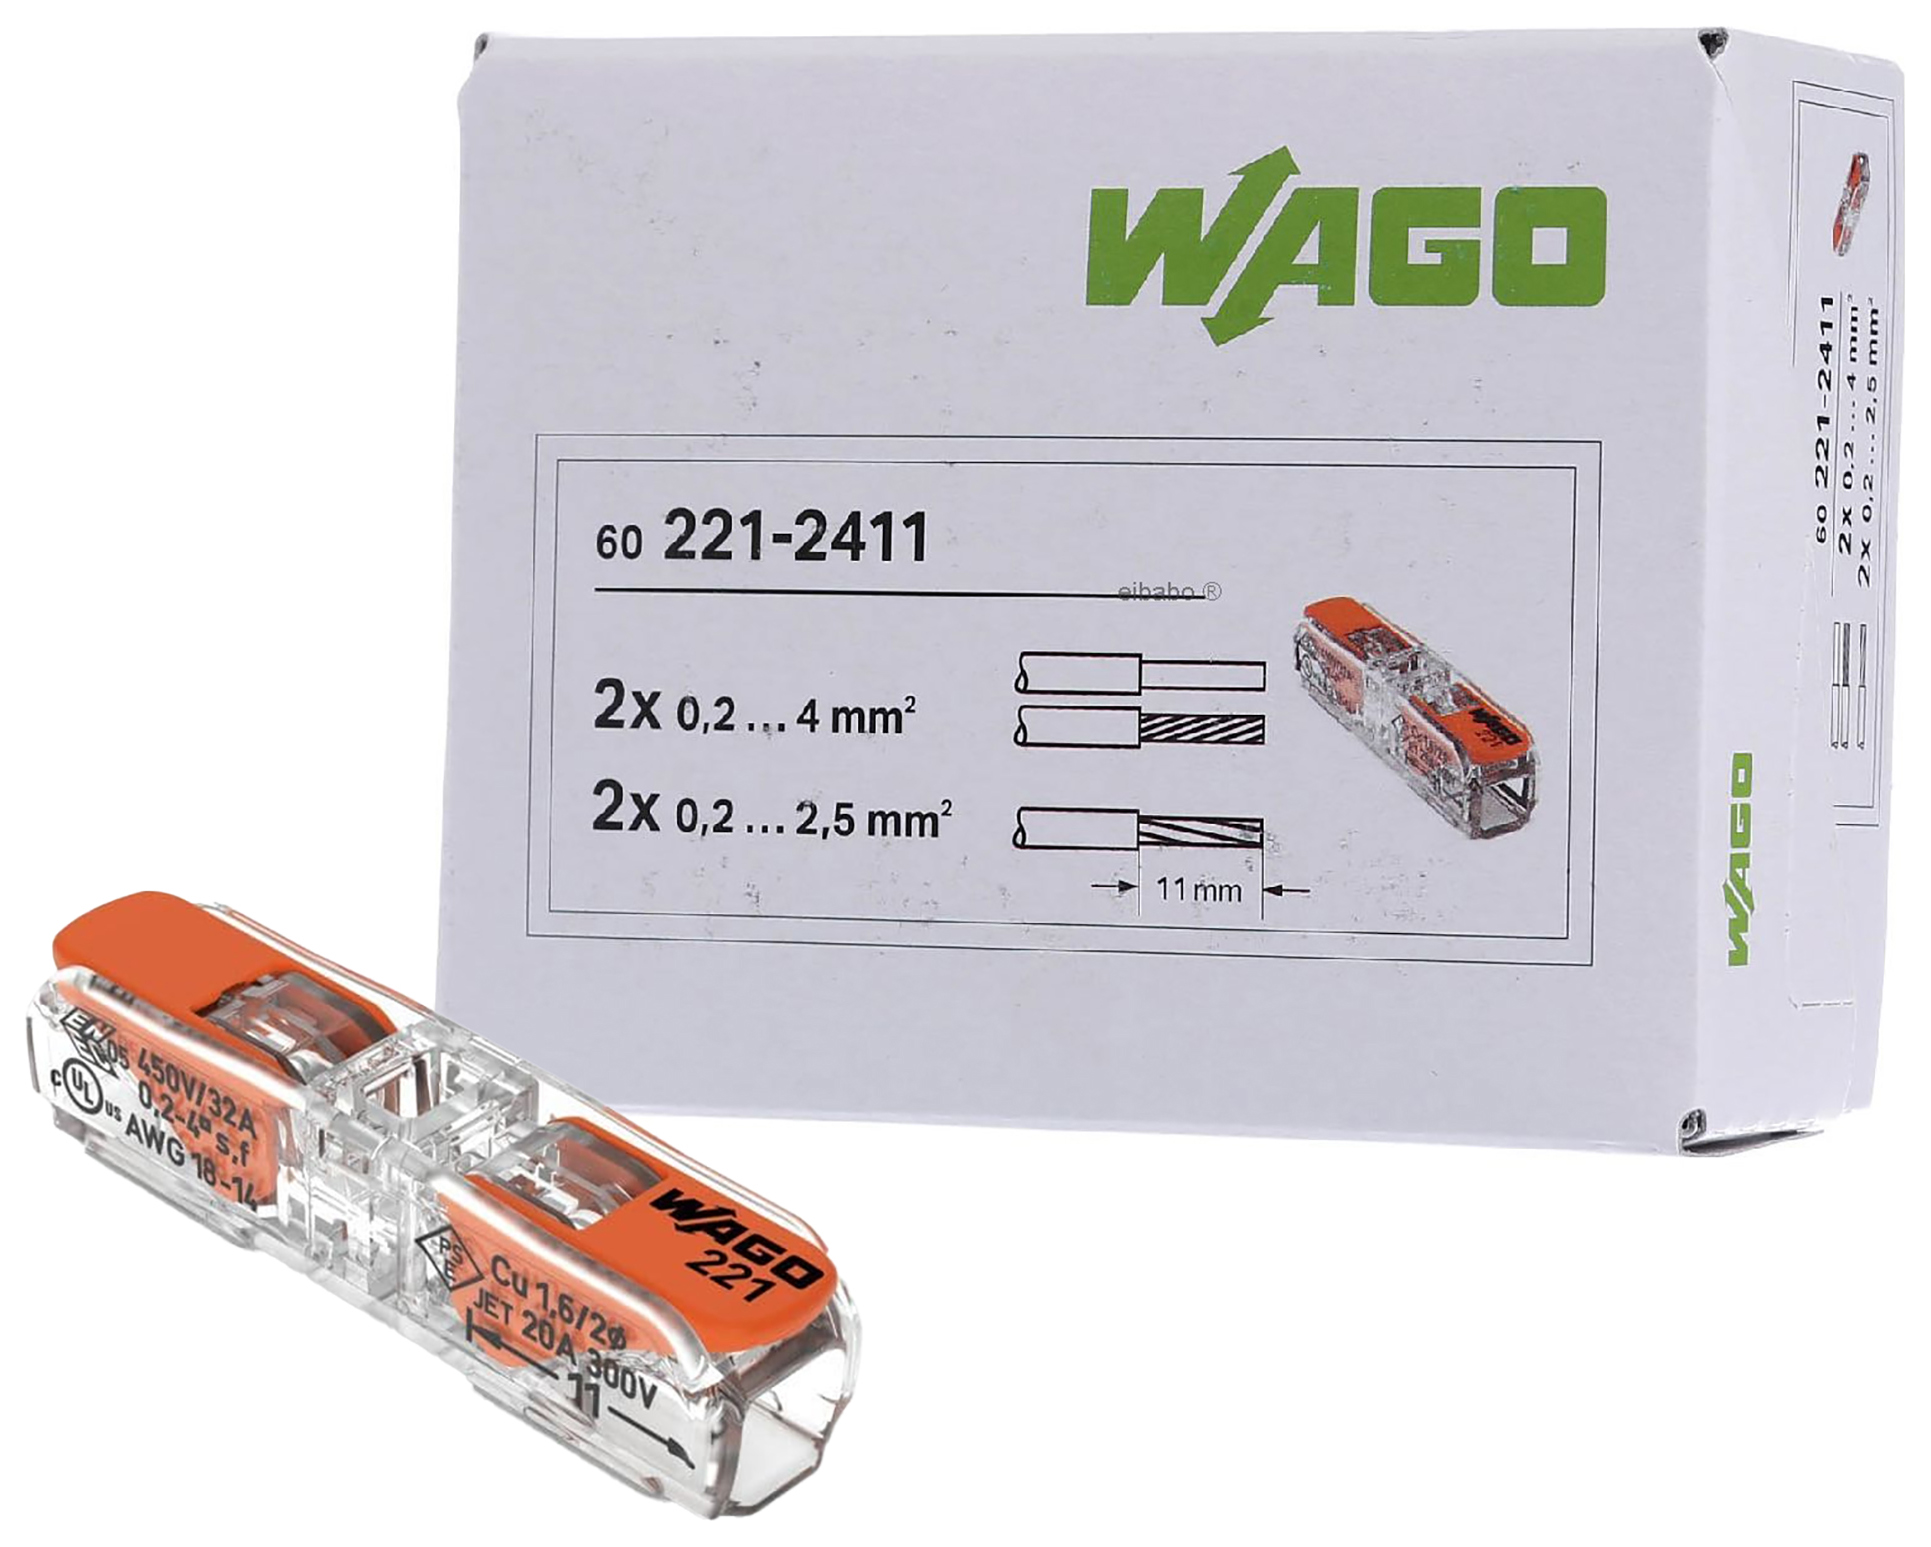 WAGO 221-2411 Inline Connector - Pack of 60